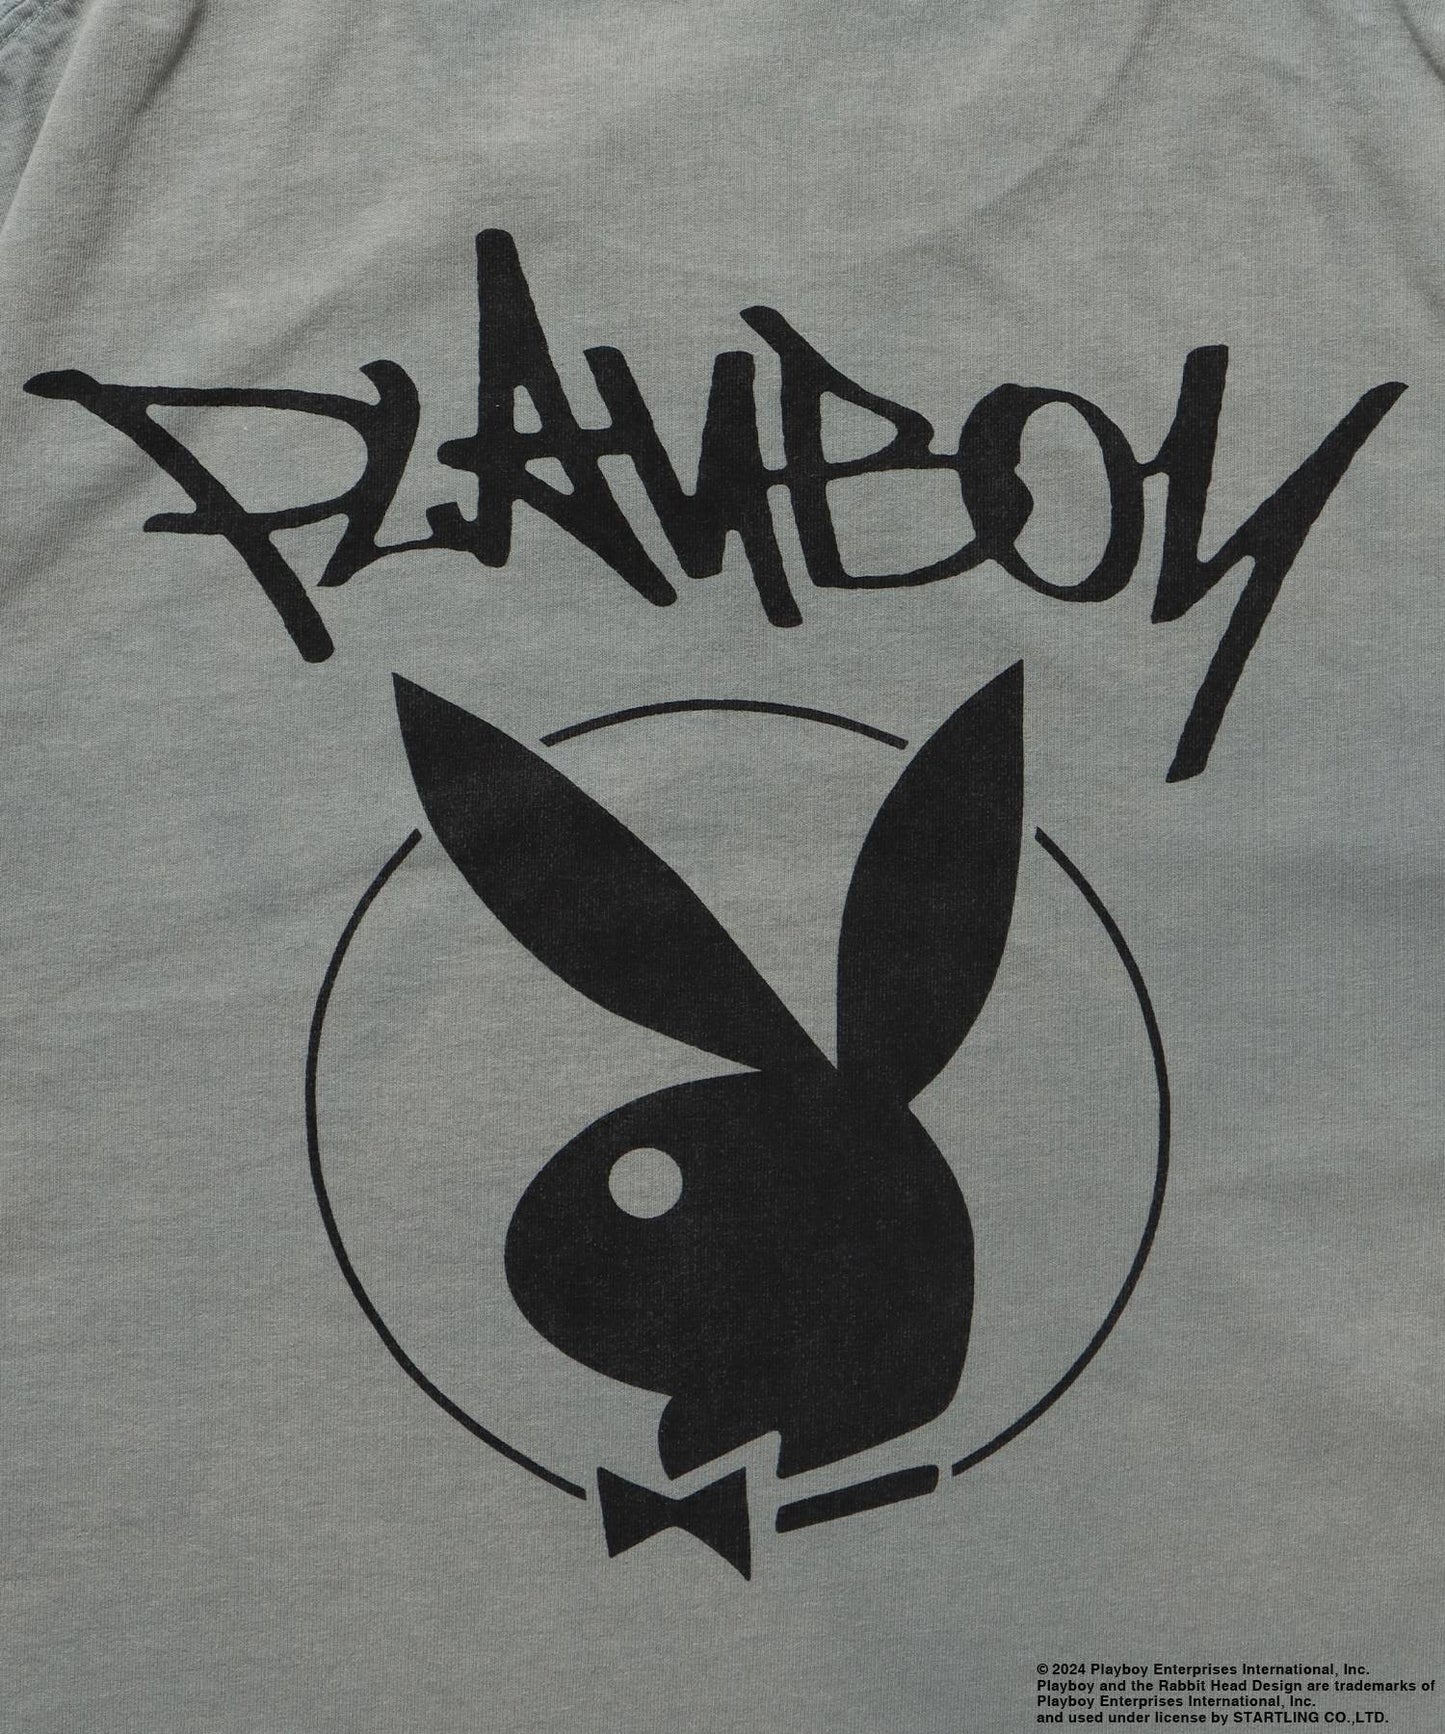 PB O.G LOGO FADE S/S TEE / PLAYBOY×Sequenz フェード加工 90s ヴィンテージ Tシャツ グラフィティ プリント 半袖 ライトグレー